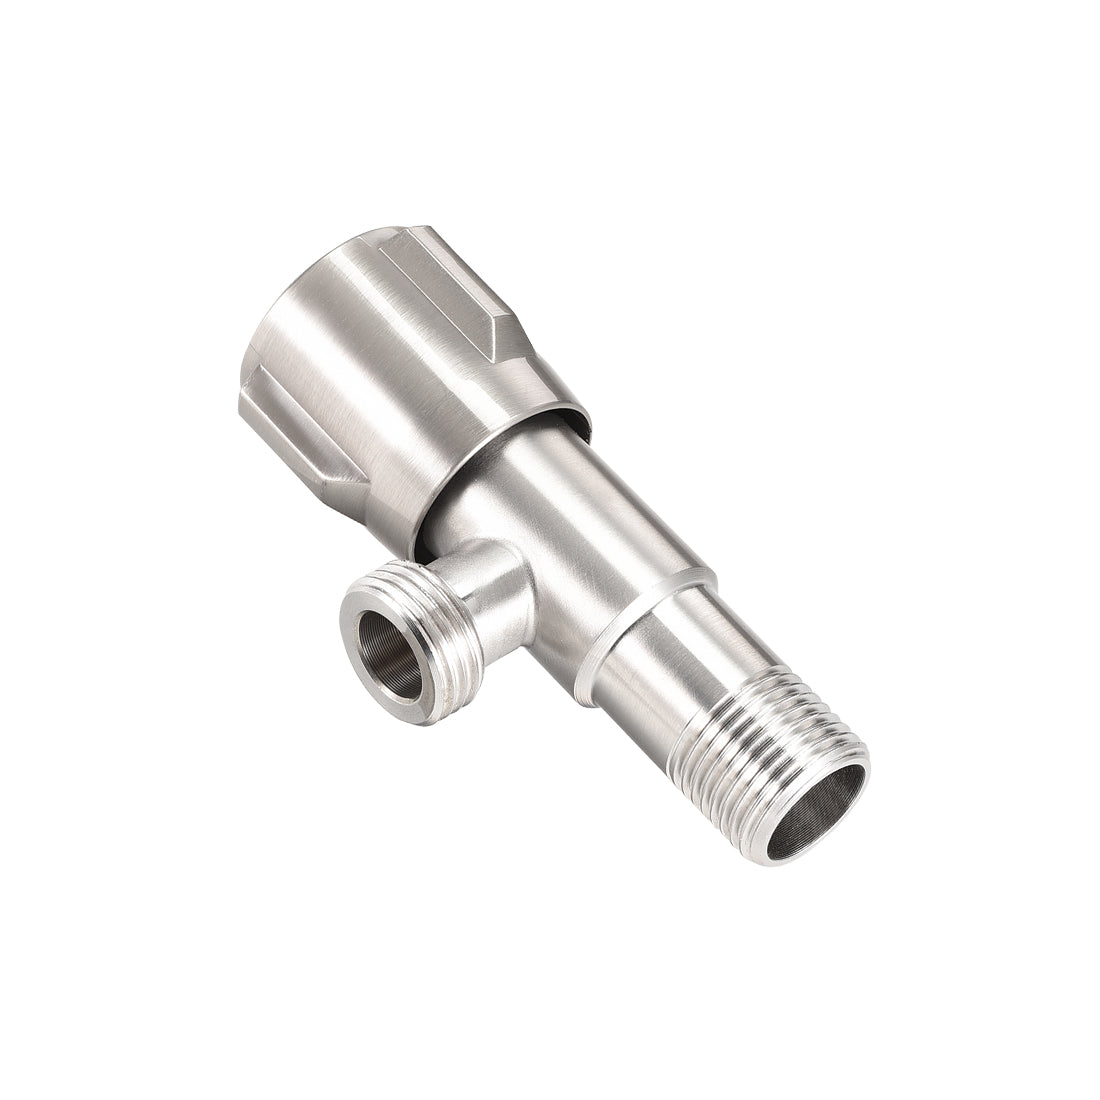 uxcell Uxcell Angle Valve Water Stop Valve G1/2 Male Thread 2 Ways Rotary 304 Stainless Steel